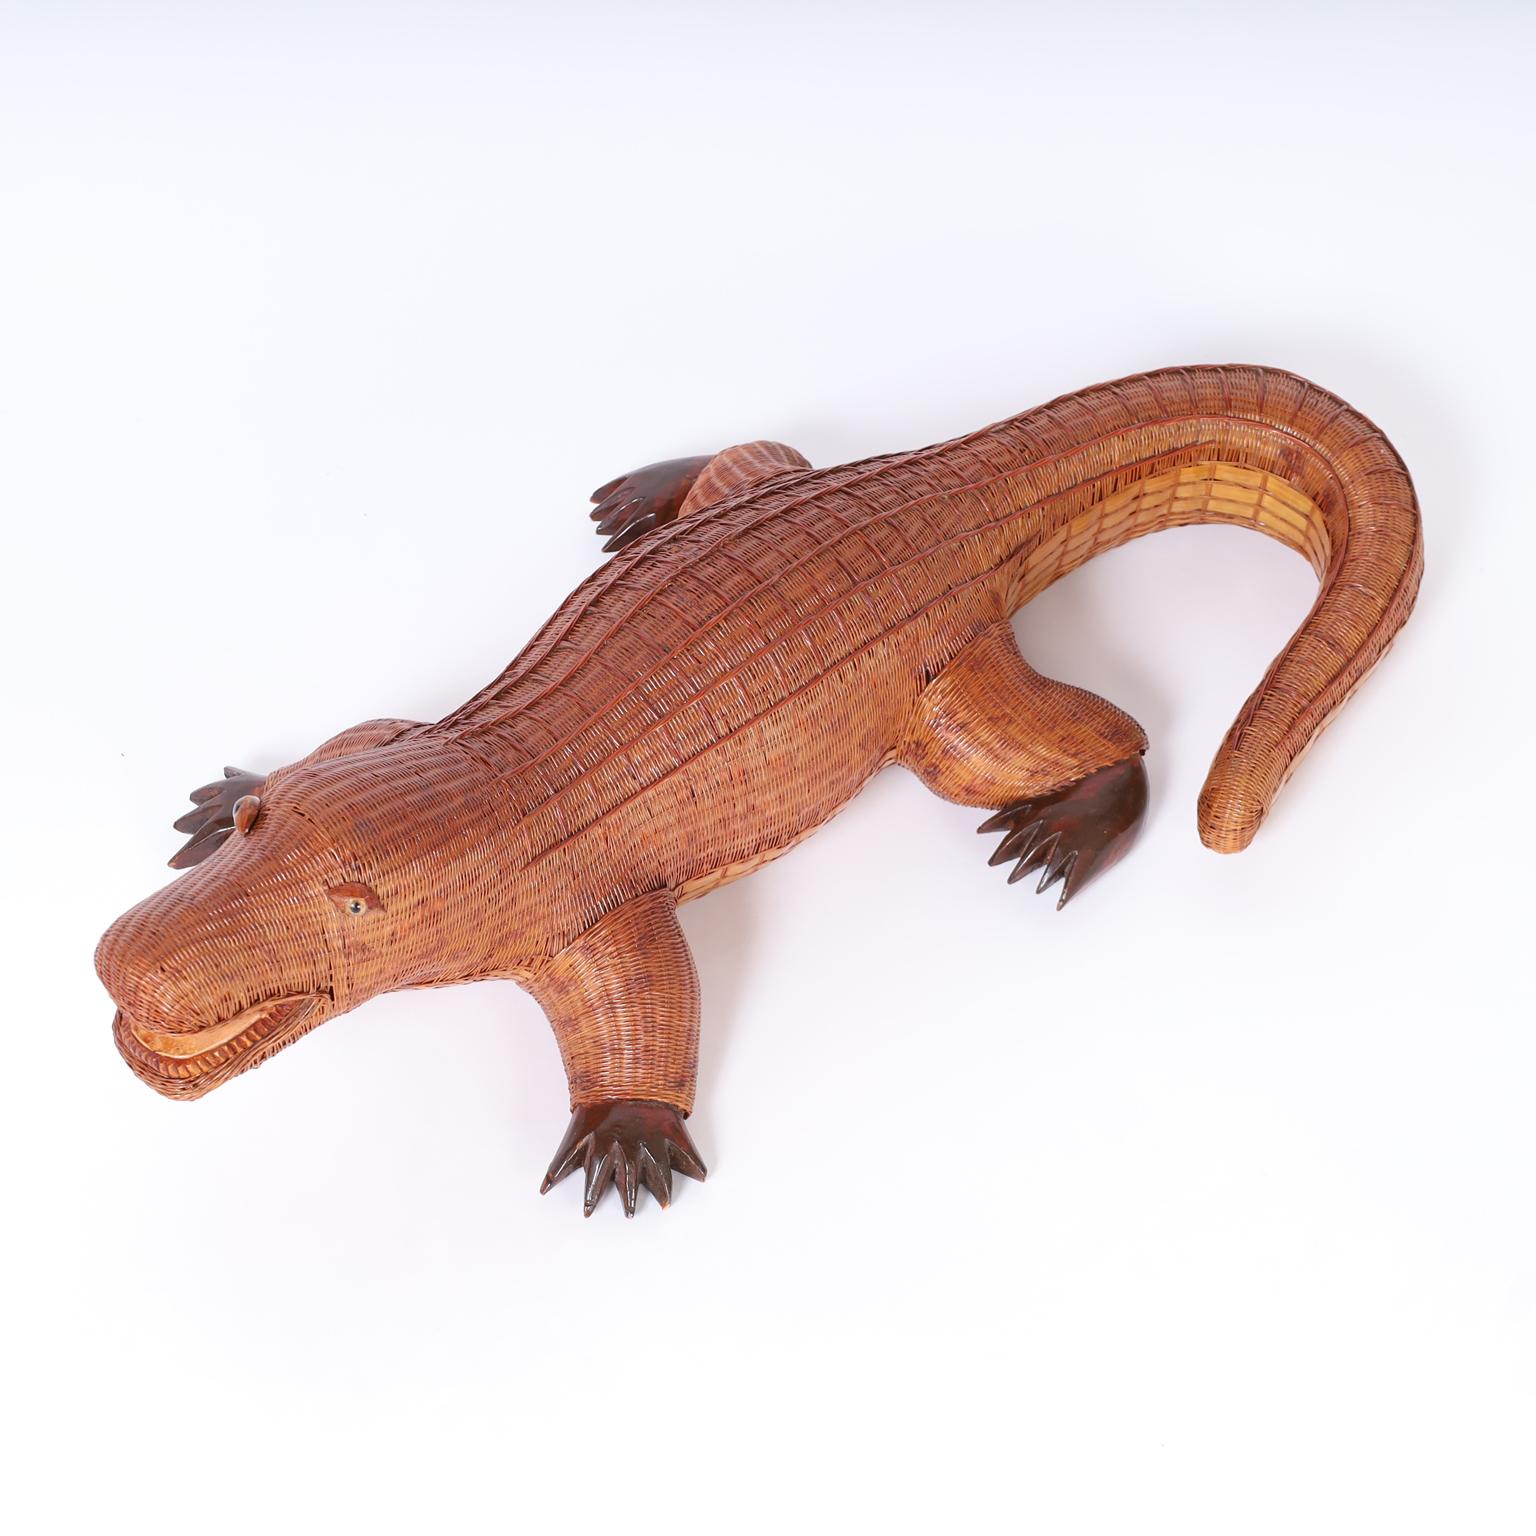 Chinese mid century alligator ambitiously crafted in wicker with a faux gator skin design and carved wood feet. From the famed Shanghai collection.